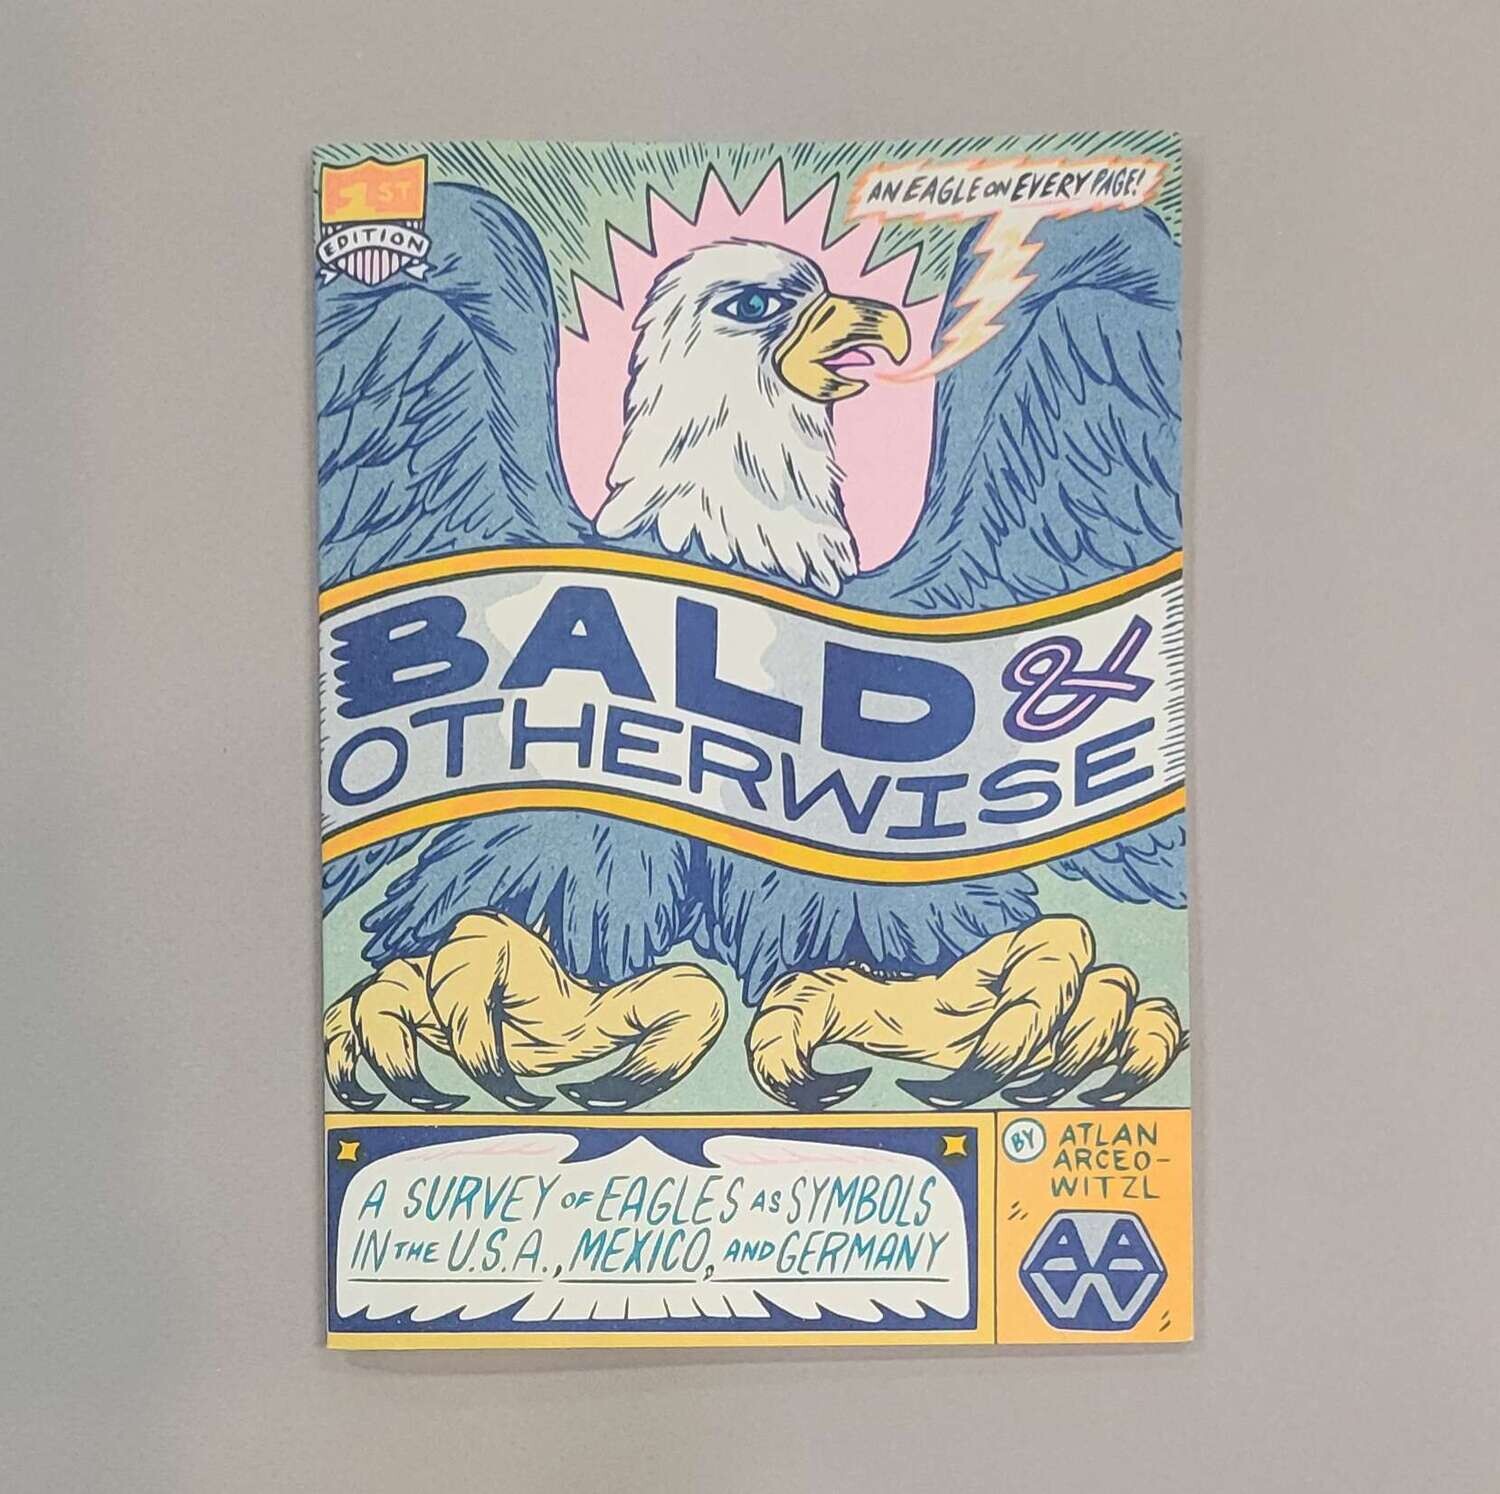 Bald & Otherwise - Risograph Zine by Atlan Arceo-Witzl